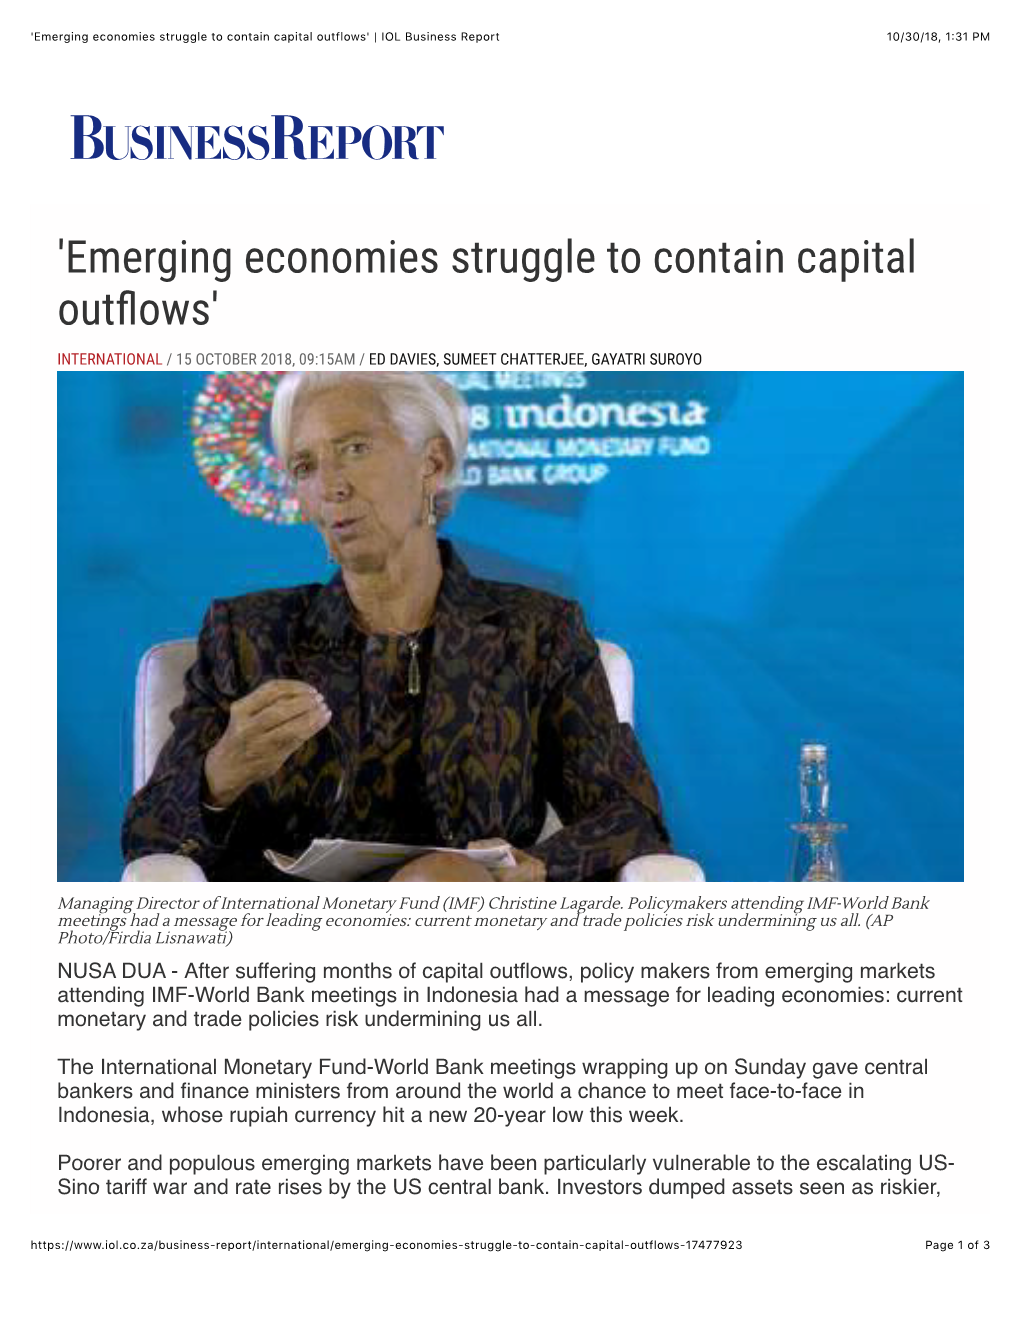 Emerging Economies Struggle to Contain Capital Outflows' | IOL Business Report 10/30/18, 1:31 PM